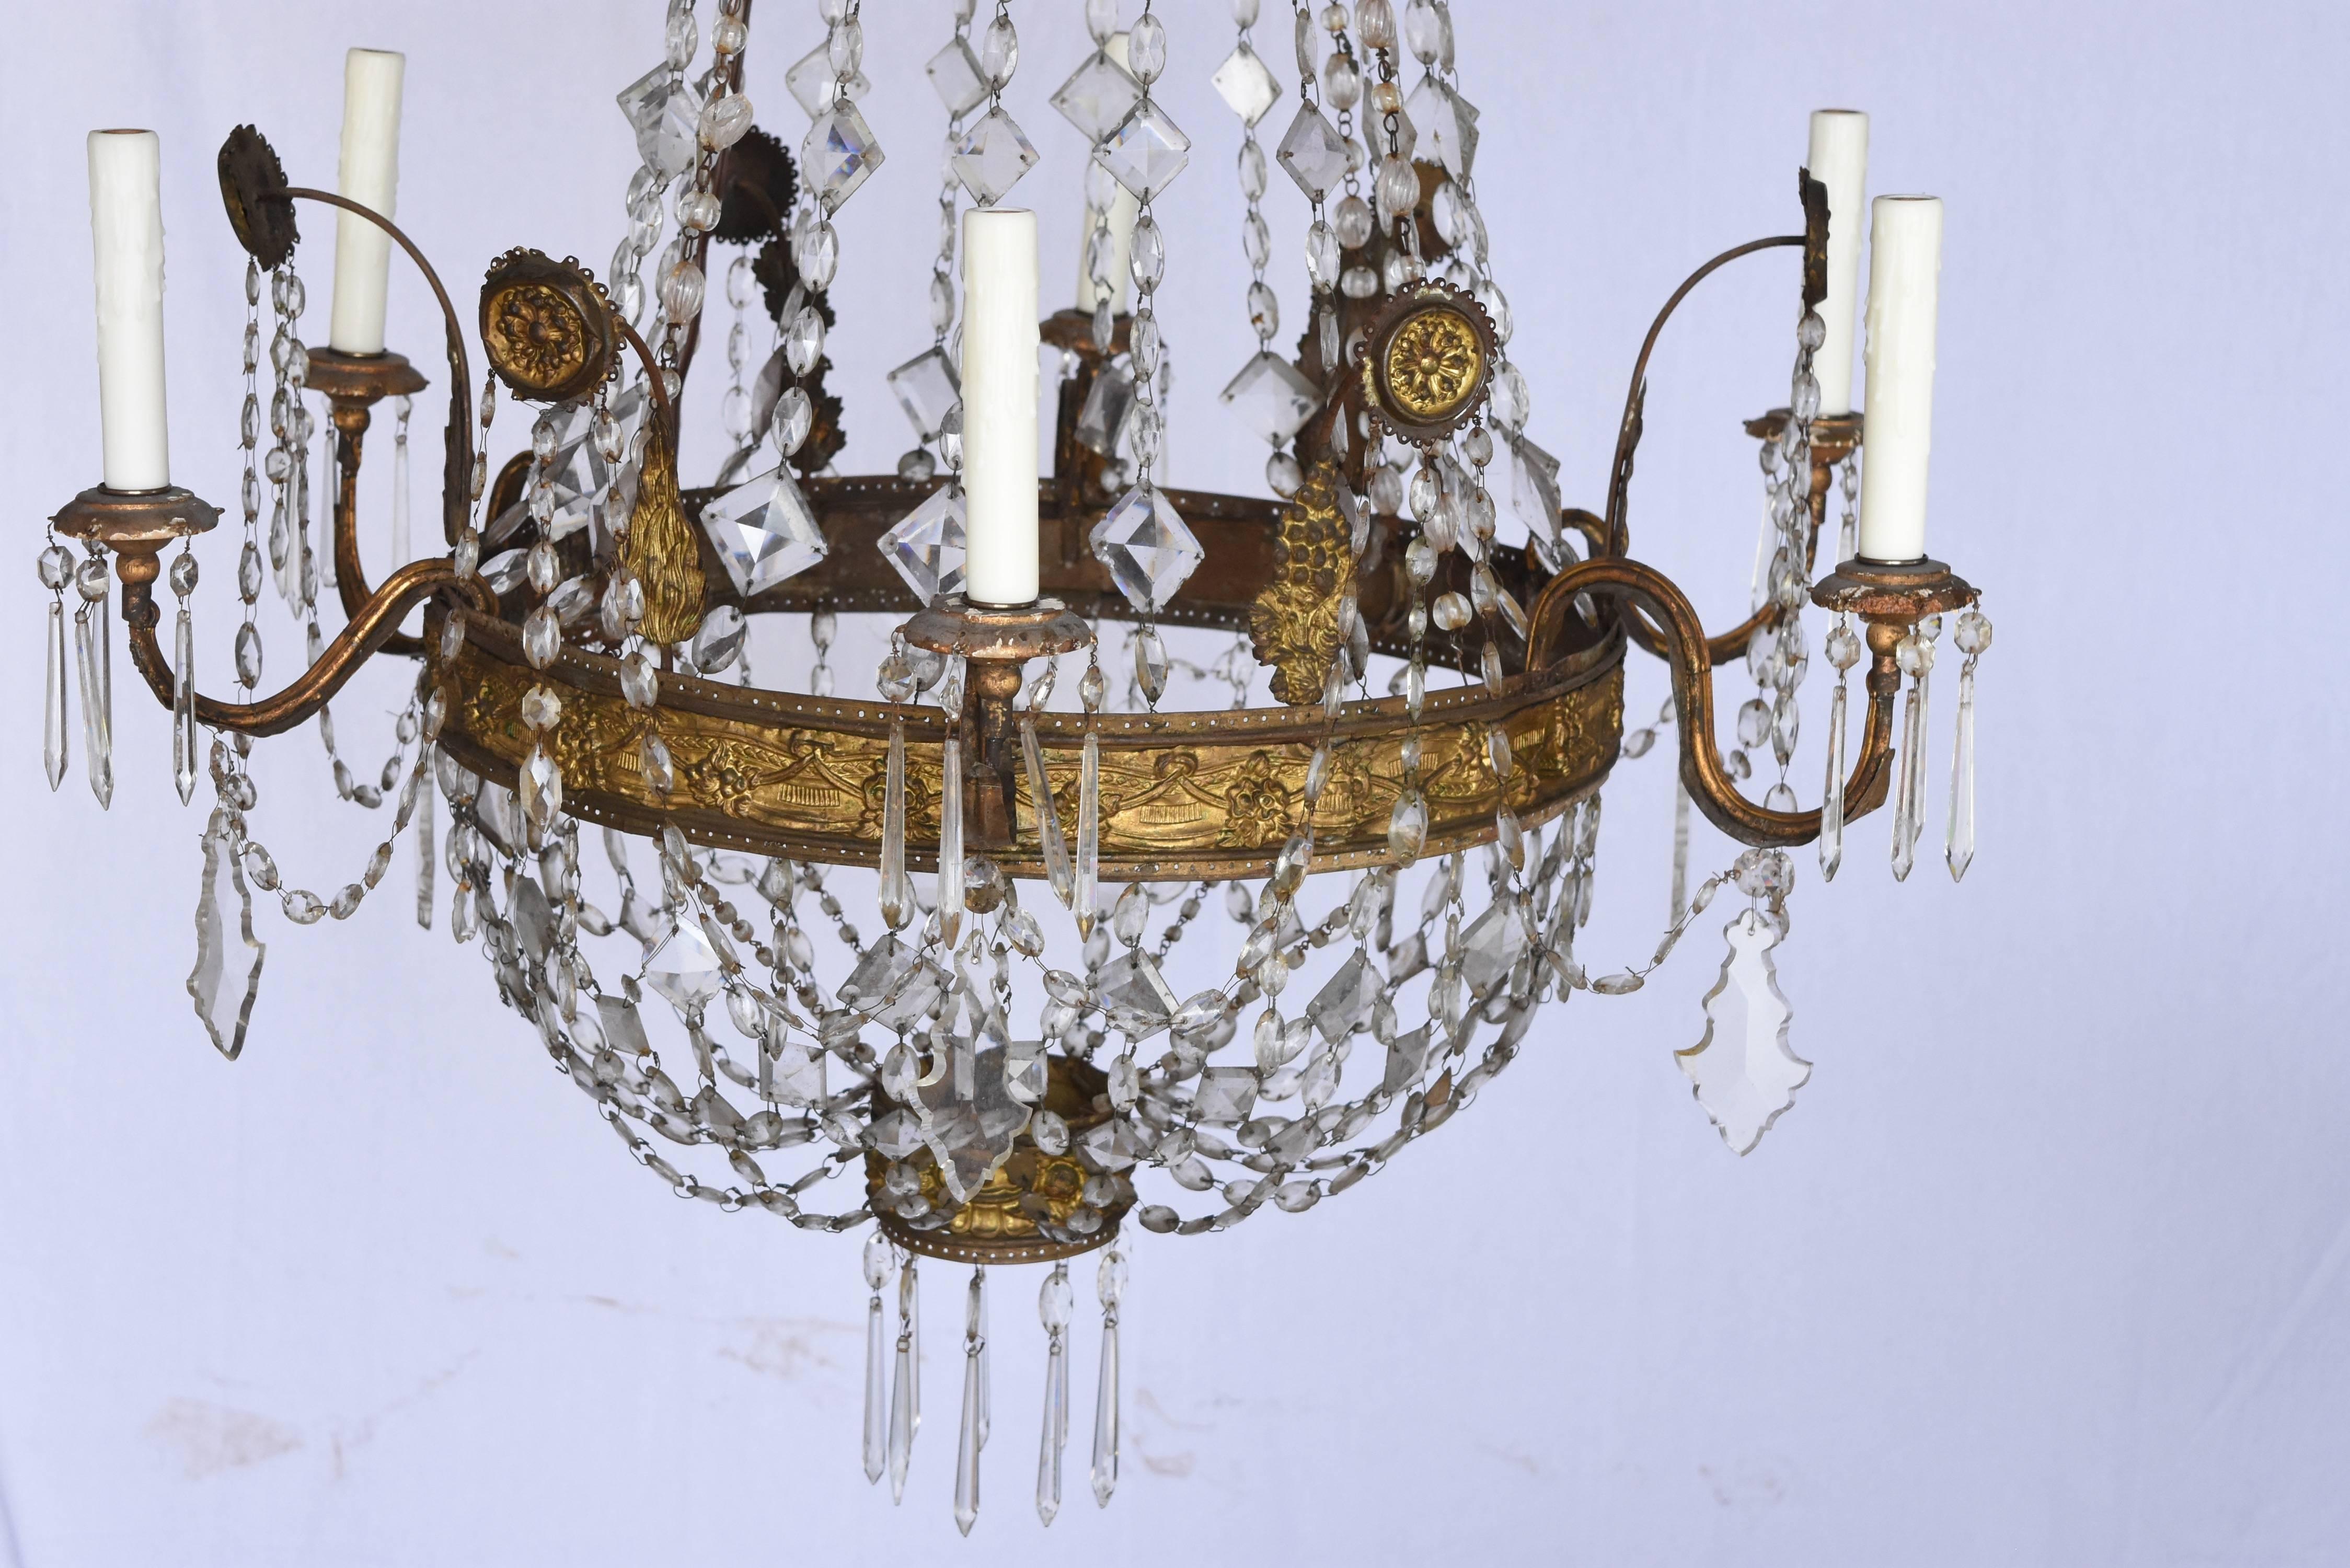 This is a beautiful late 1700s Italian chandelier from the Genova area of Italy.
Its hand-hammered repousse style is elegant and the way the crystals sweep make it airy and light. It has be newly rewired for us standard as well.